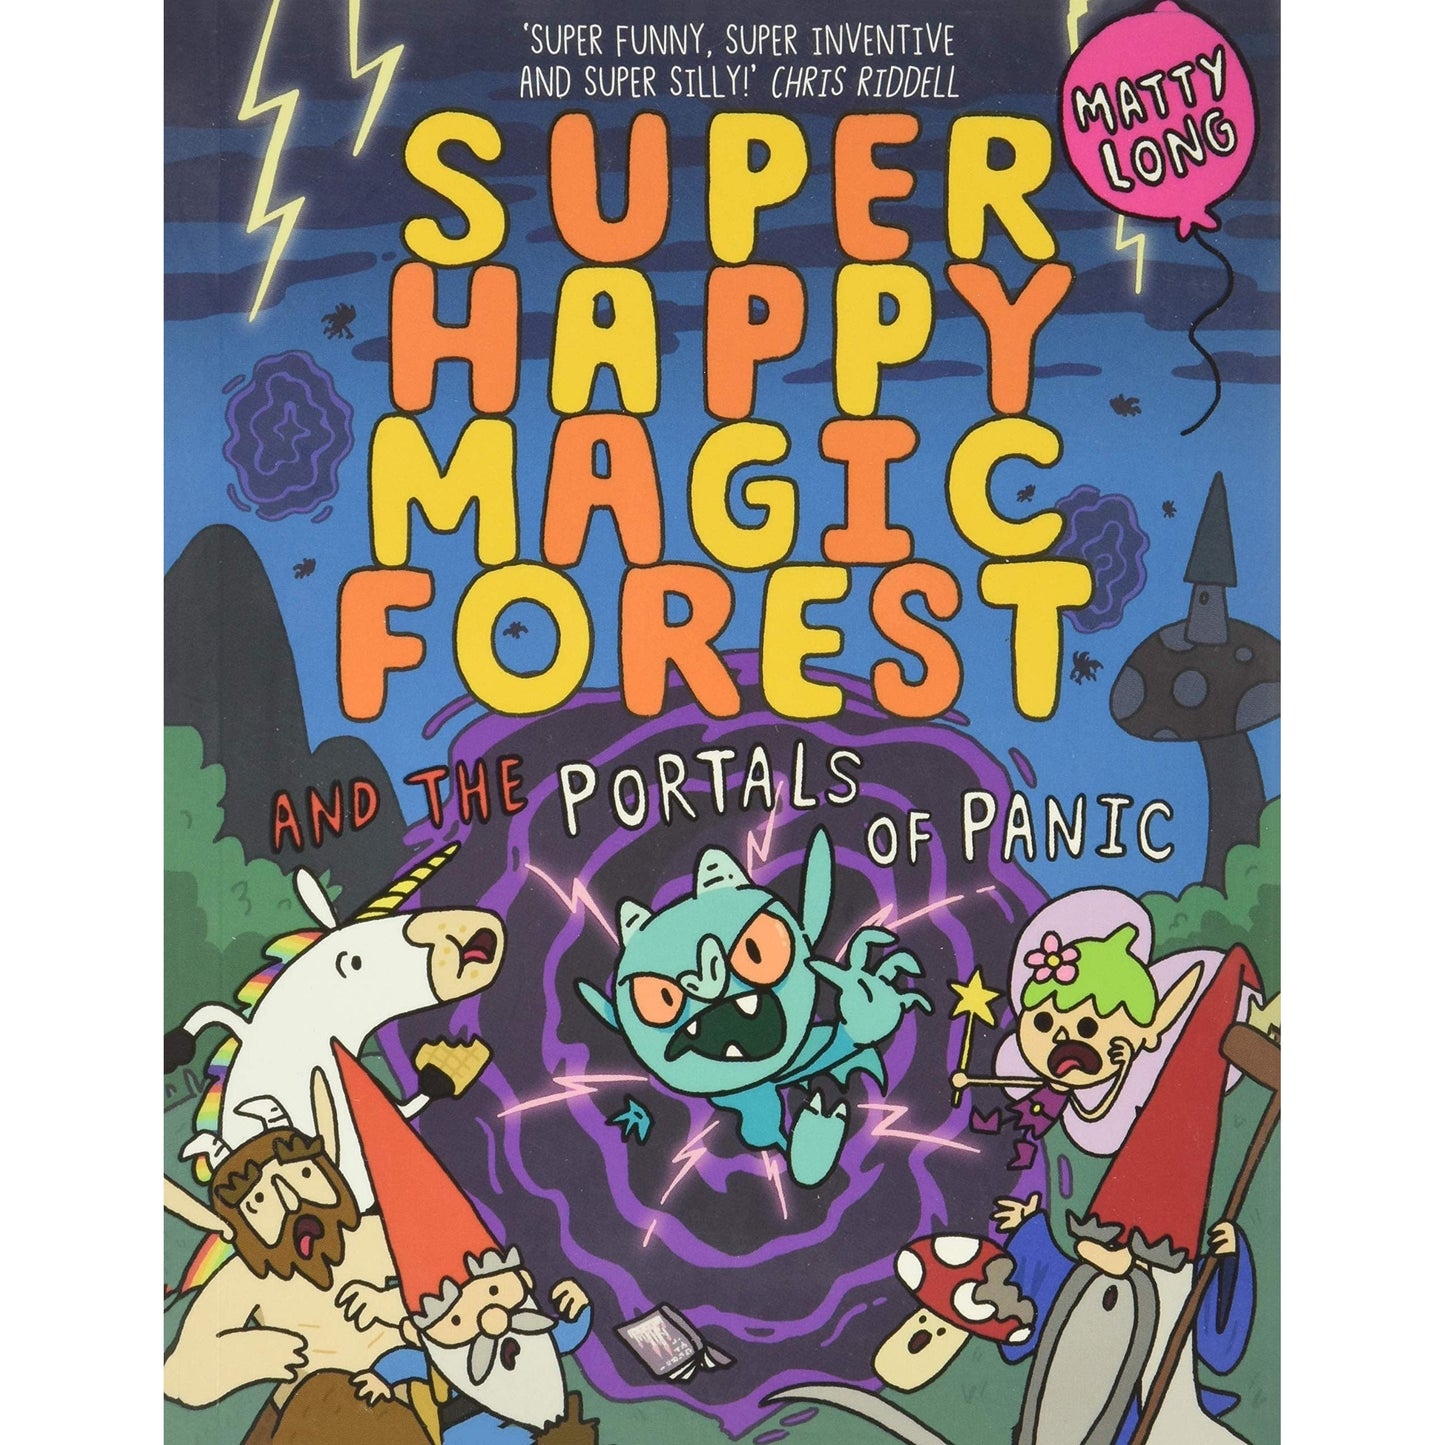 Super Happy Magic Forest and the Portals Of Panic - Matty Long